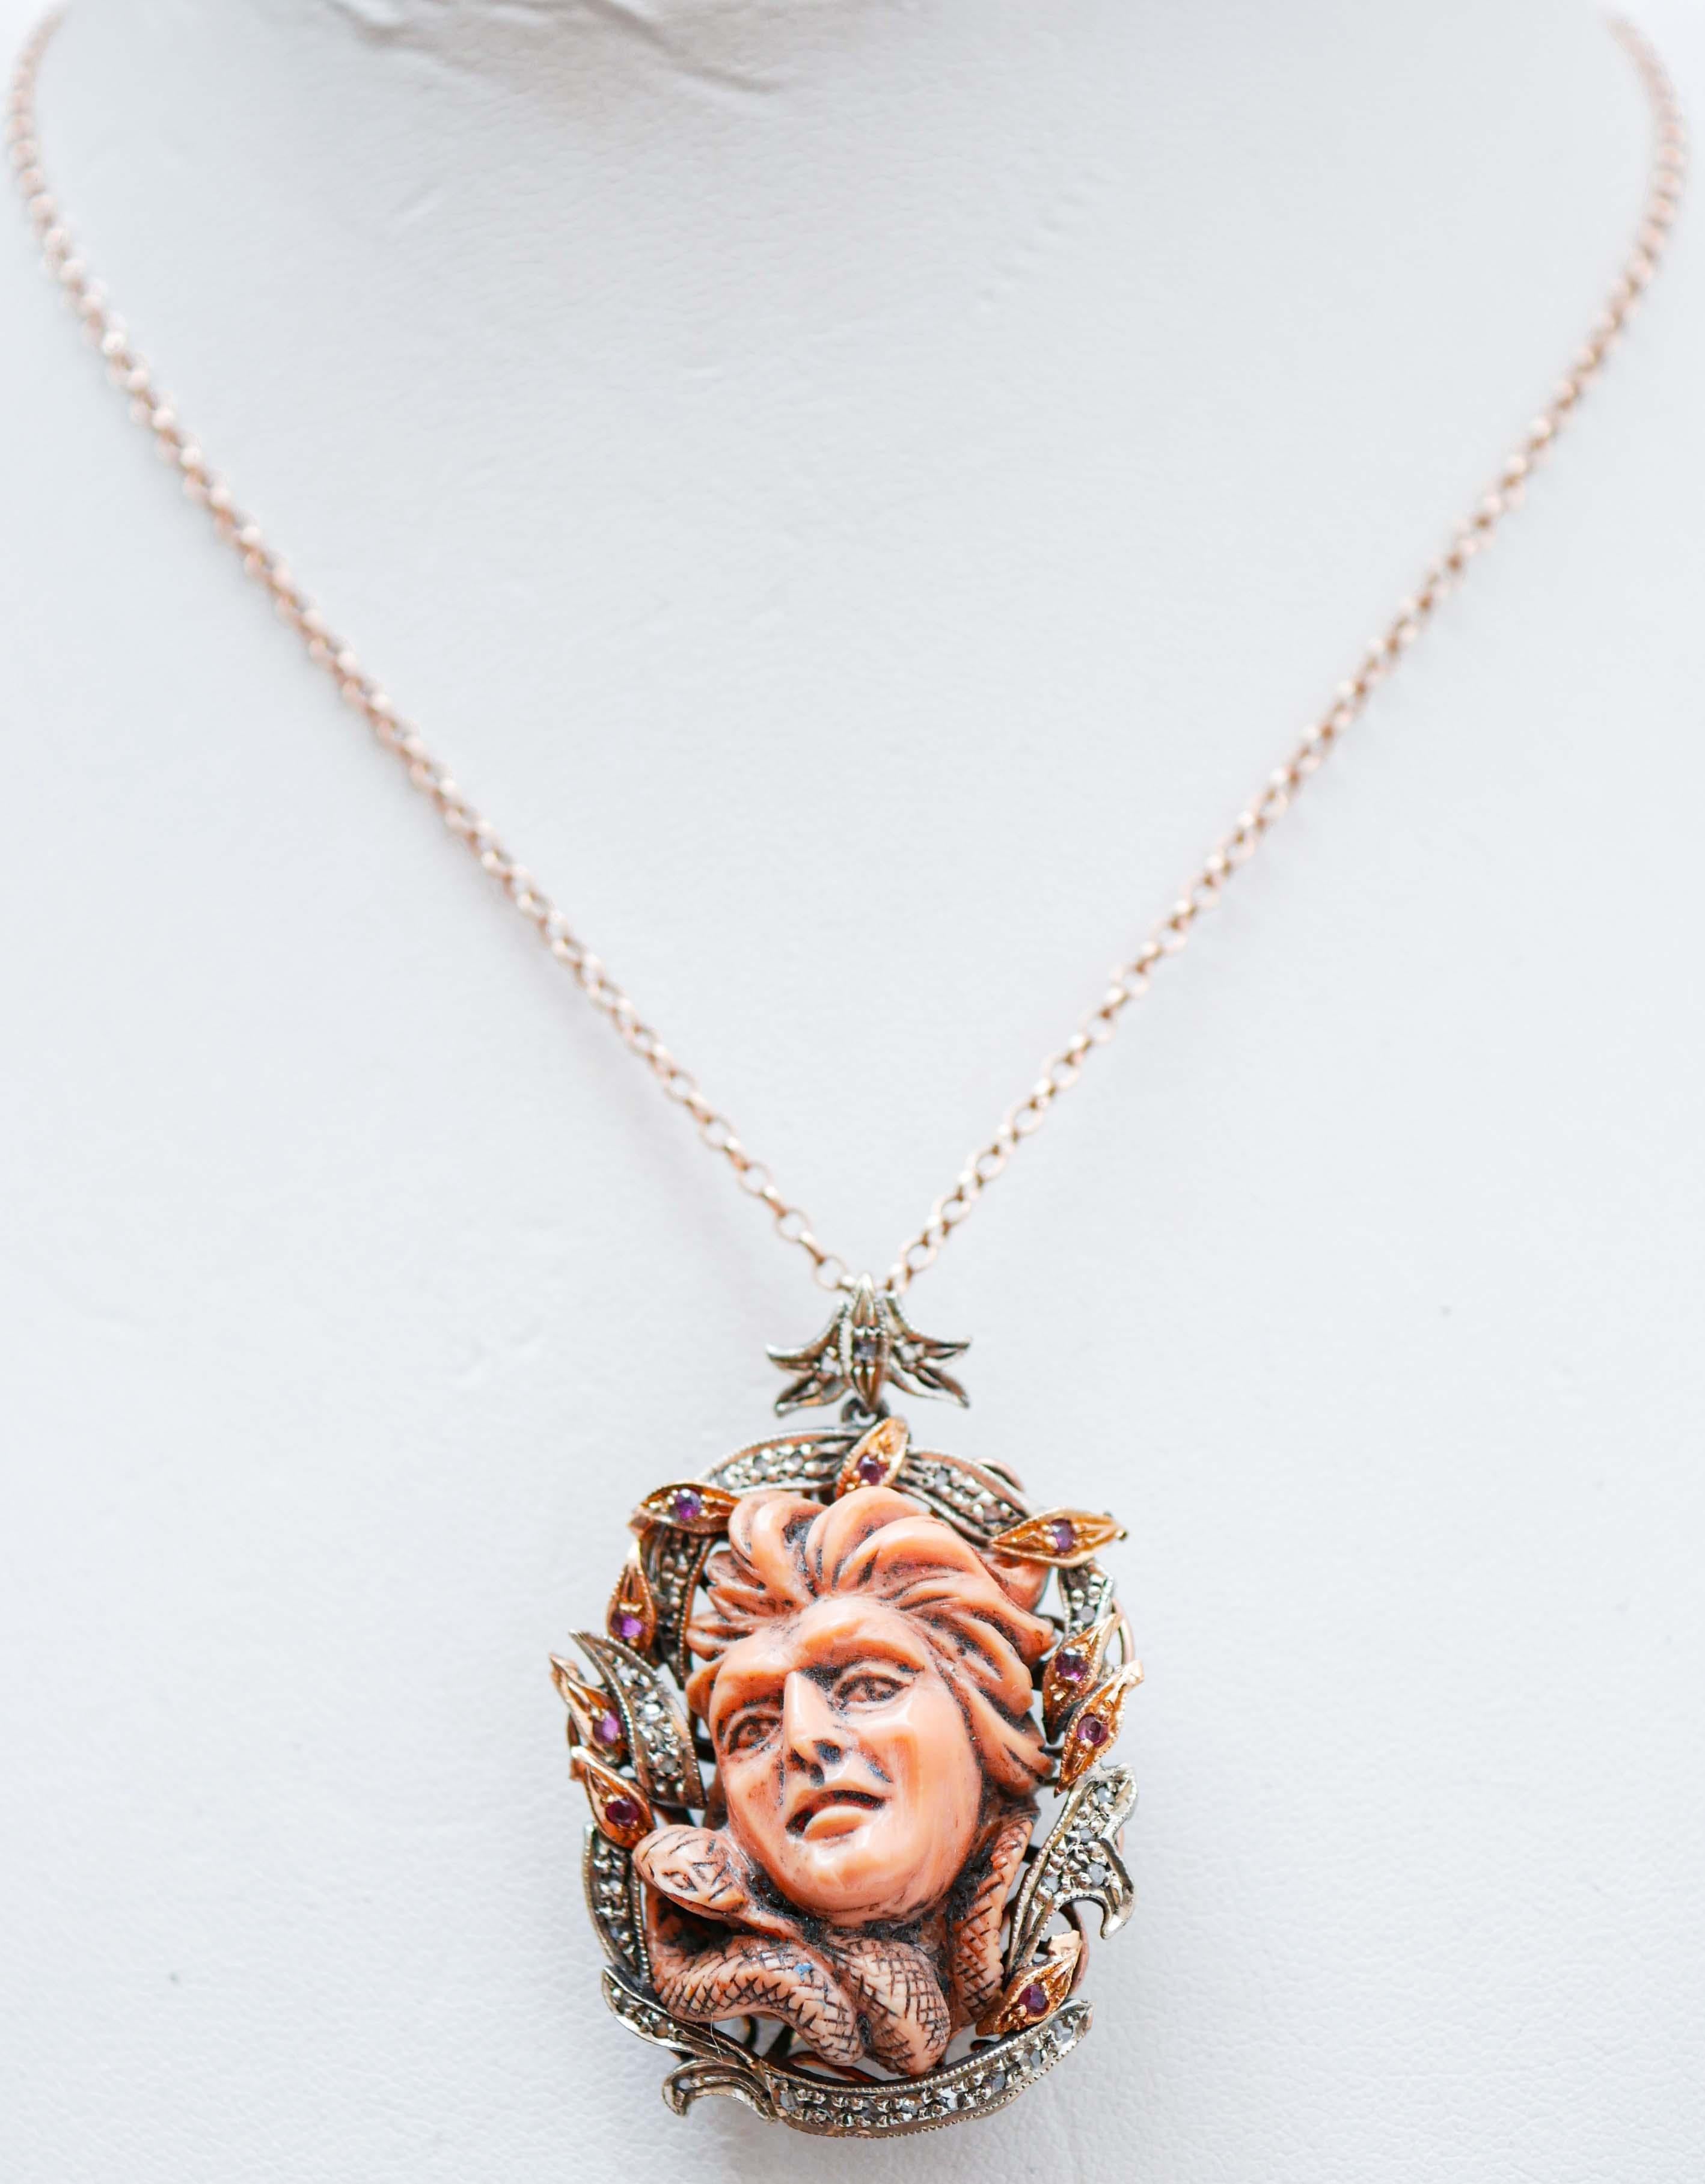 SHIPPING POLICY: 
No additional costs will be added to this order. 
Shipping costs will be totally covered by the seller (customs duties included).

Brooch/Pendant in 9 kt rose gold and silver structure mounted with a carved coral surrounded by